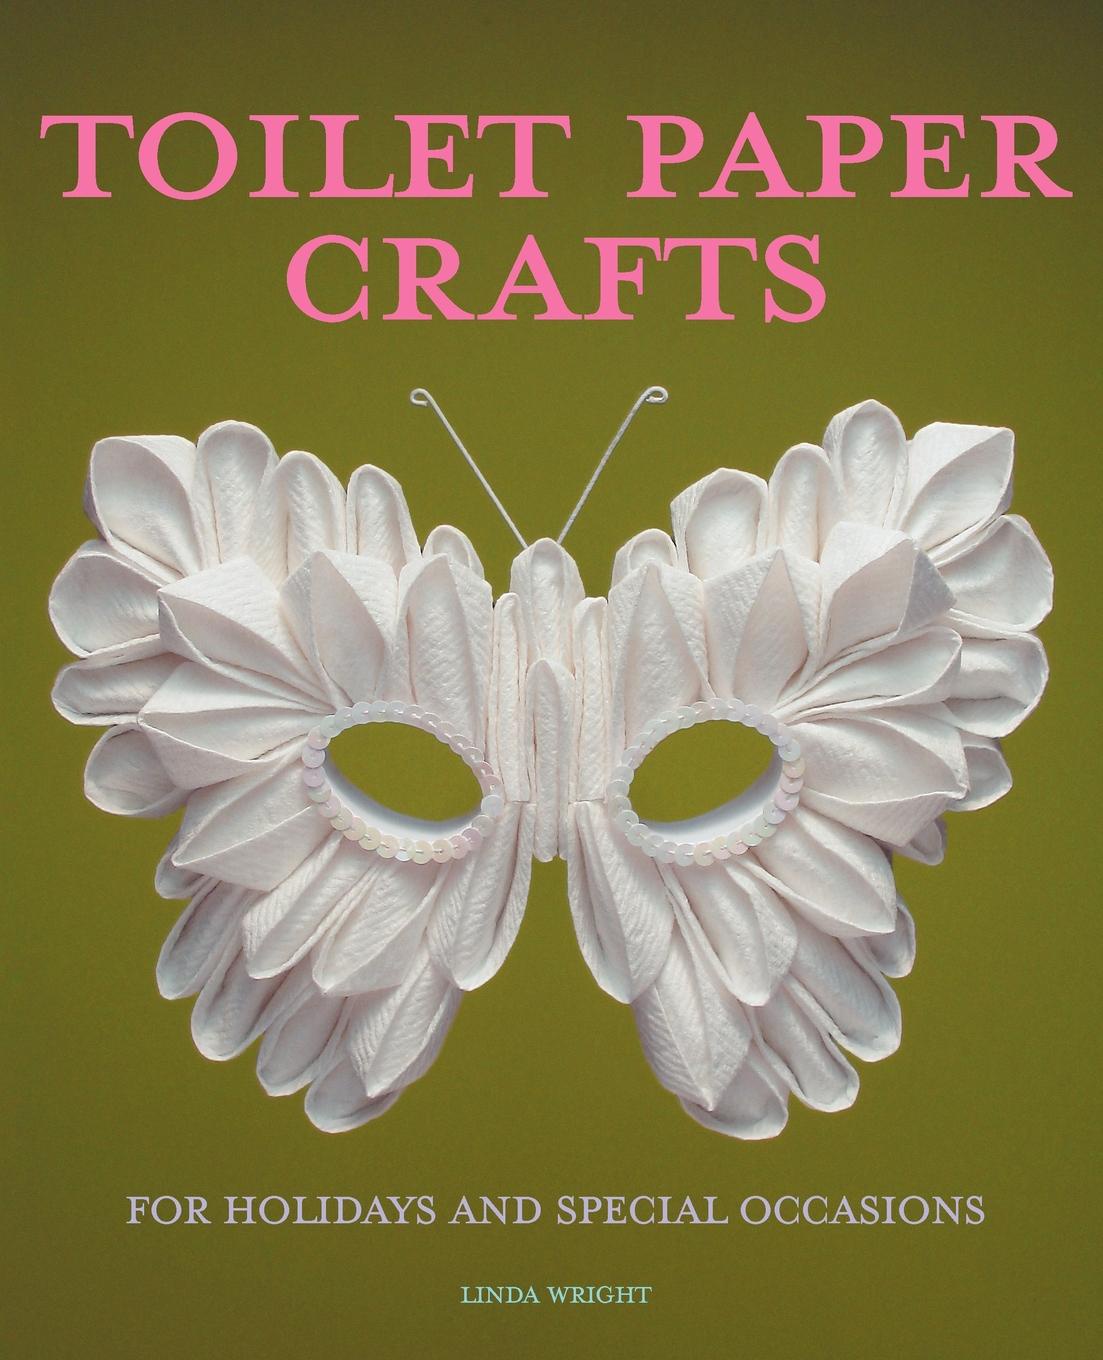 Toilet Paper Crafts for Holidays and Special Occasions. 60 Papercraft, Sewing, Origami and Kanzashi Projects